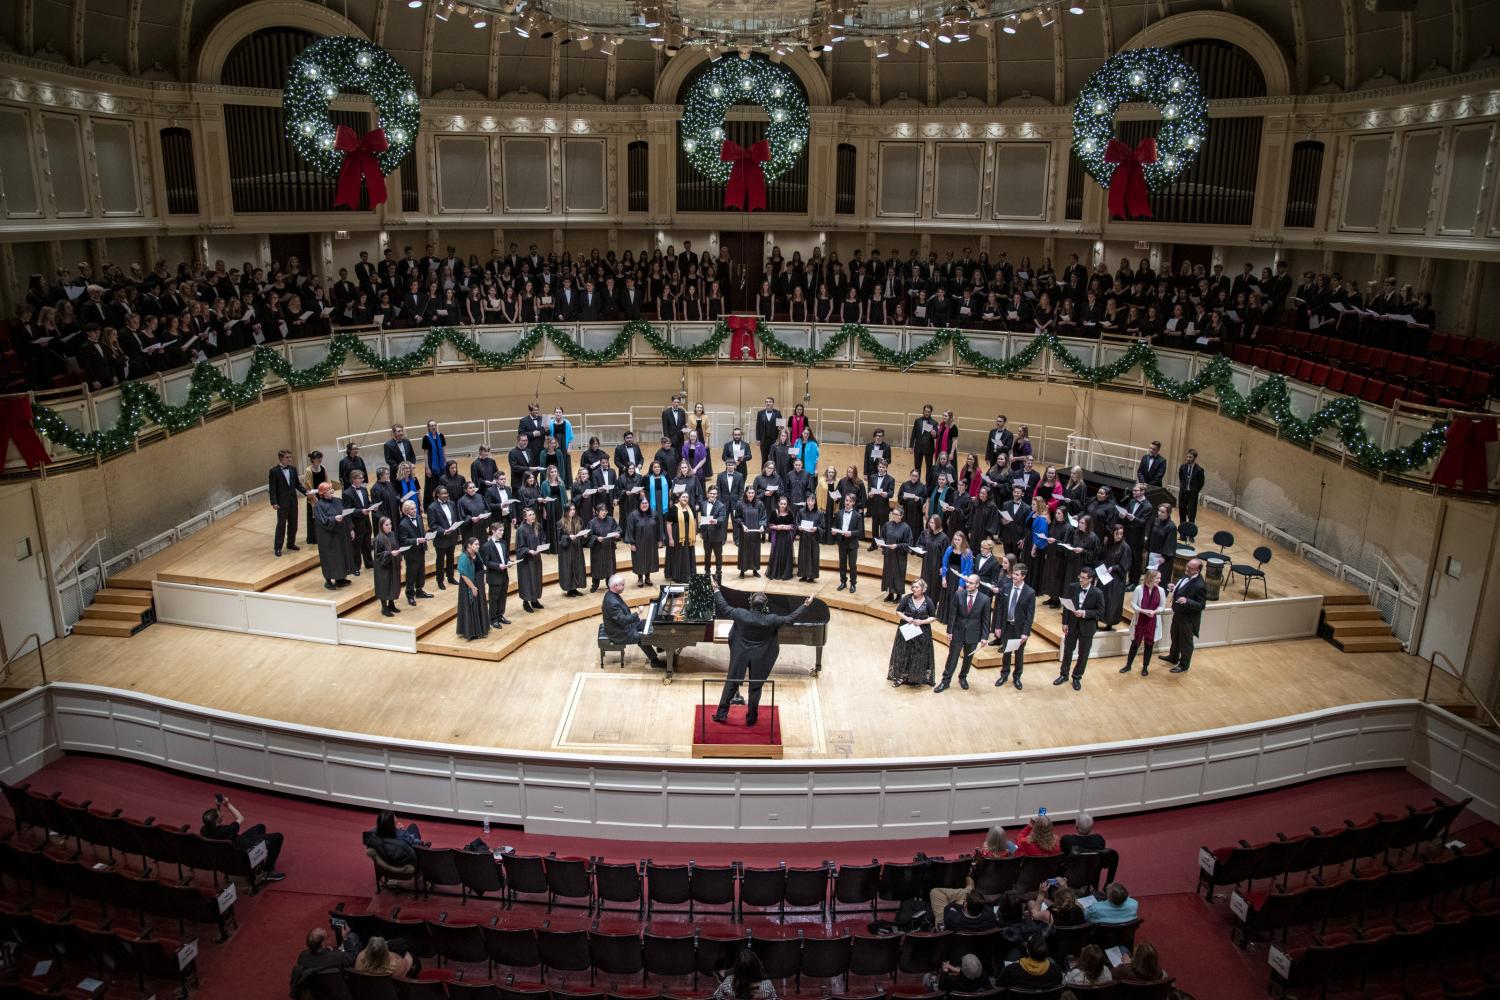 The <a href='http://y2l.4dian8.com'>bv伟德ios下载</a> Choir performs in the Chicago Symphony Hall.